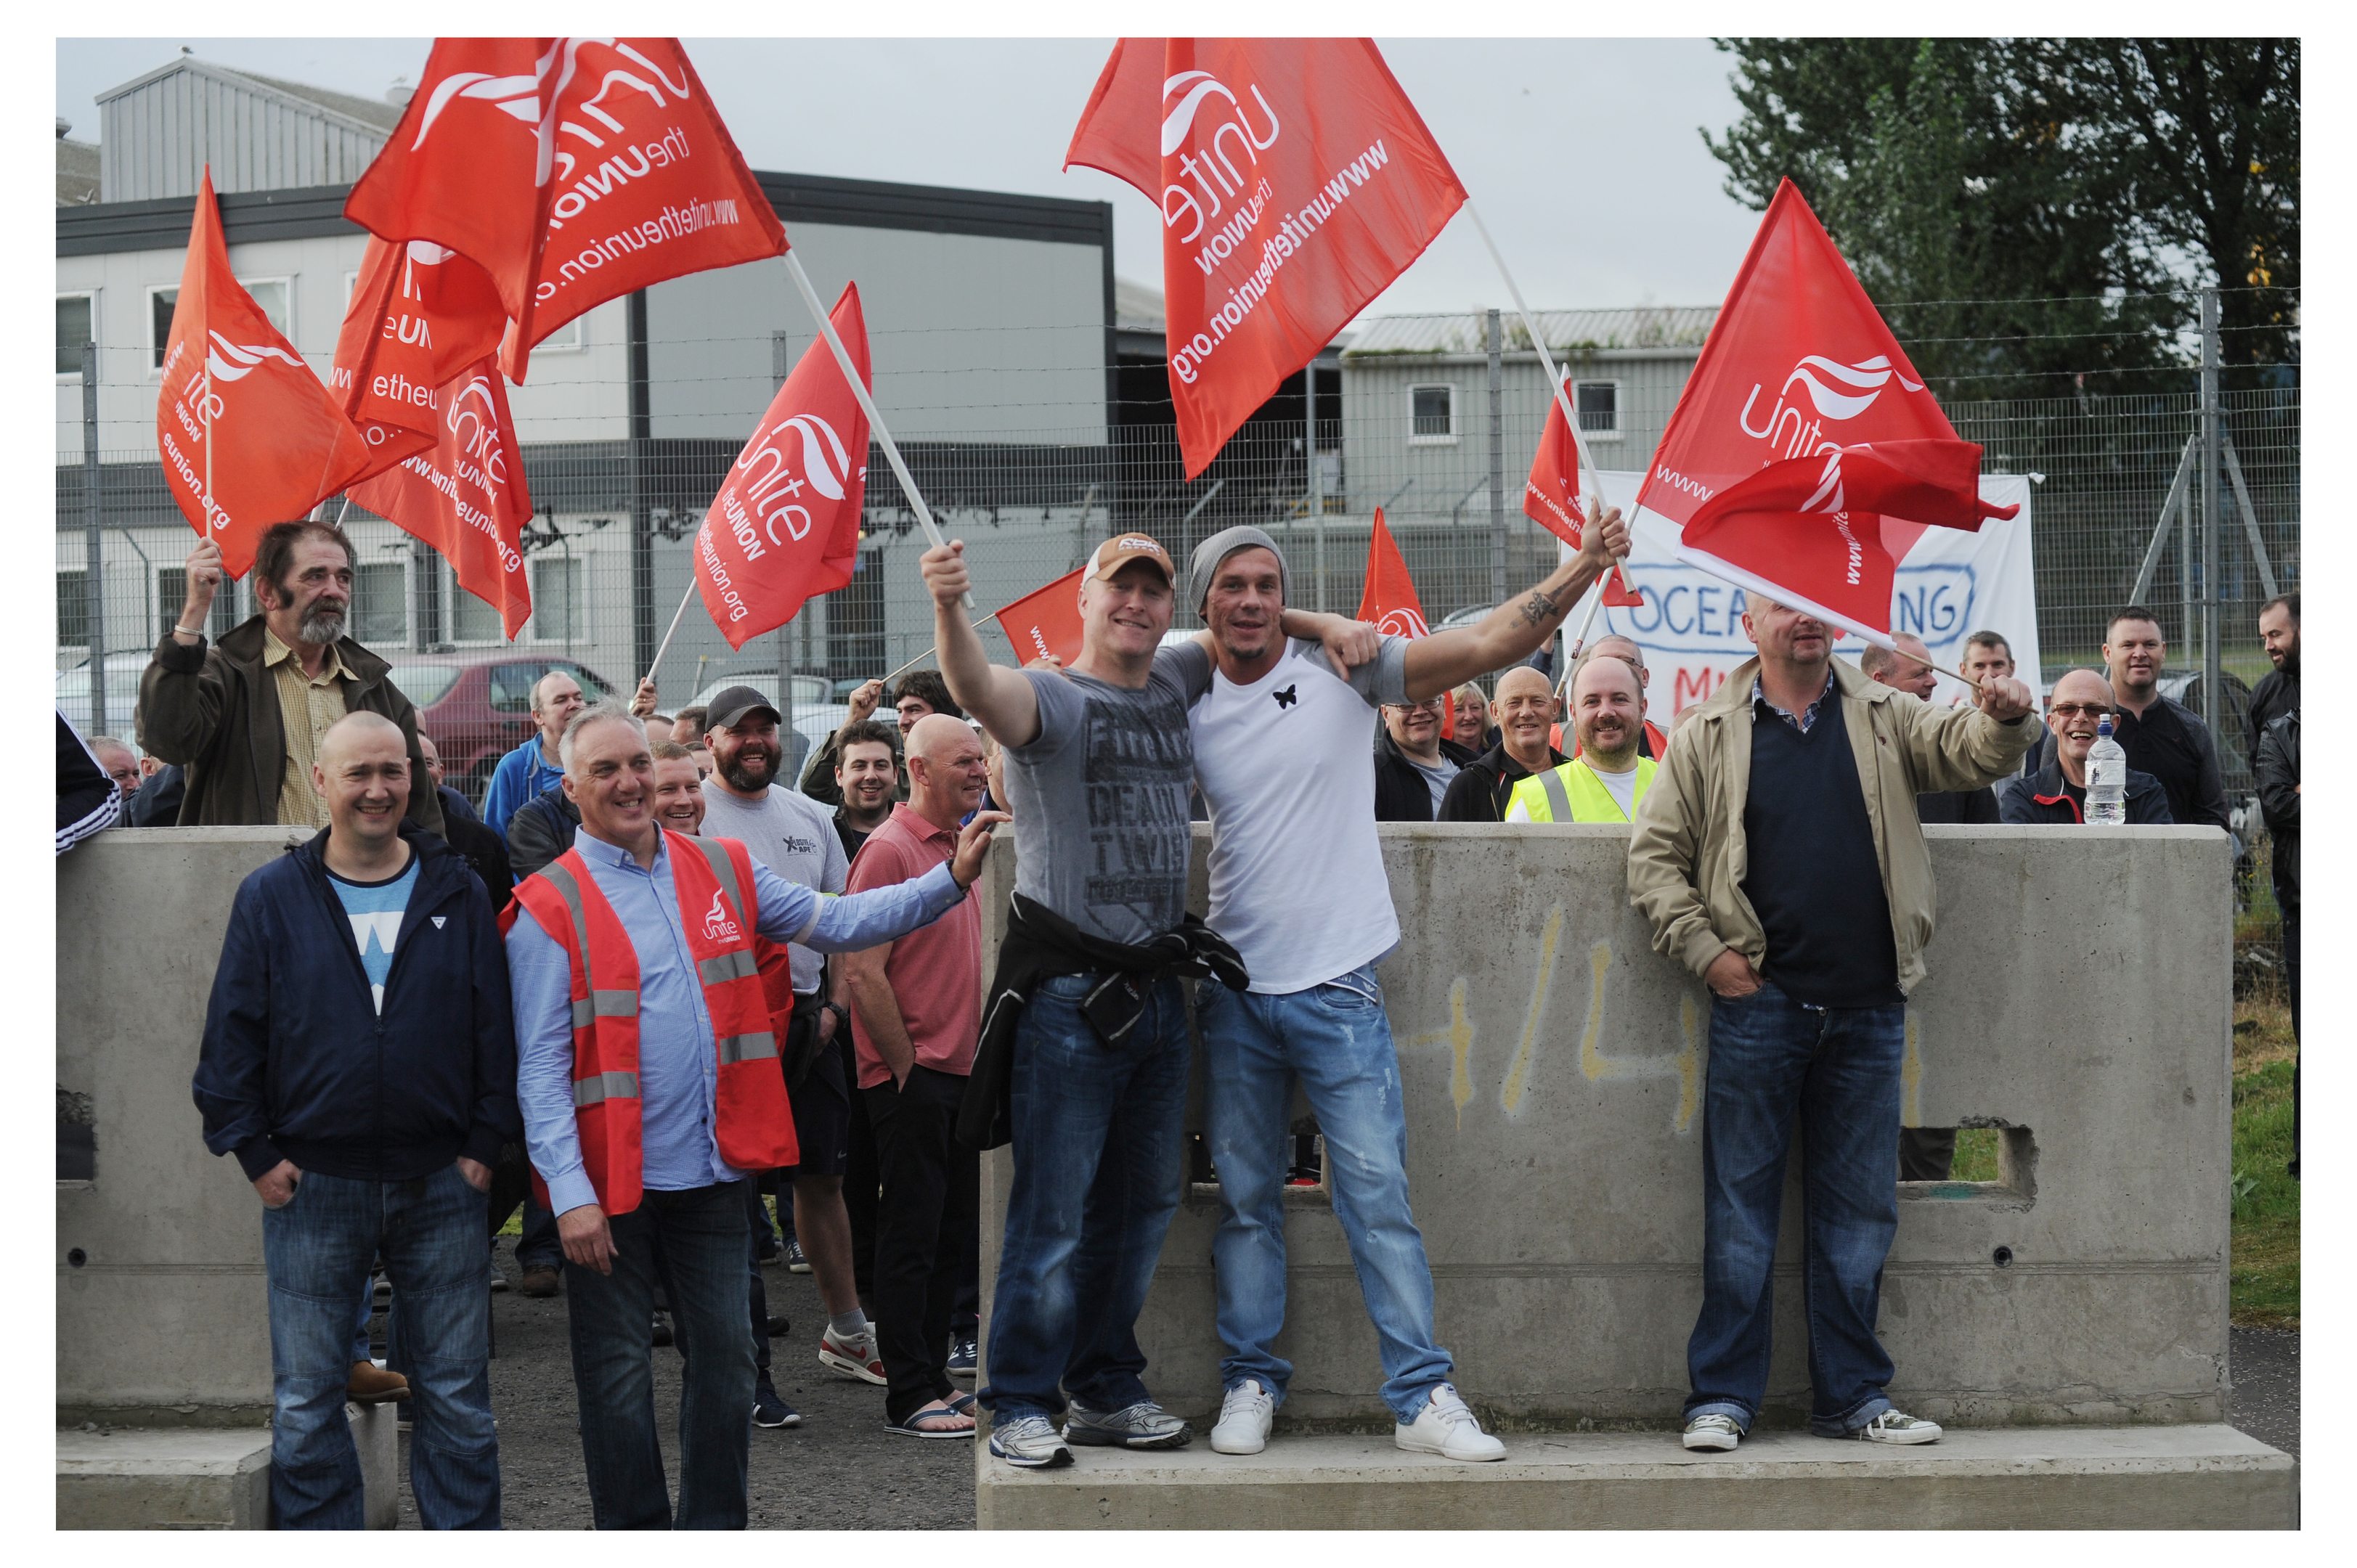 Unite members take to the picket line during a previous industrial dispute at Oceaneering in 2016